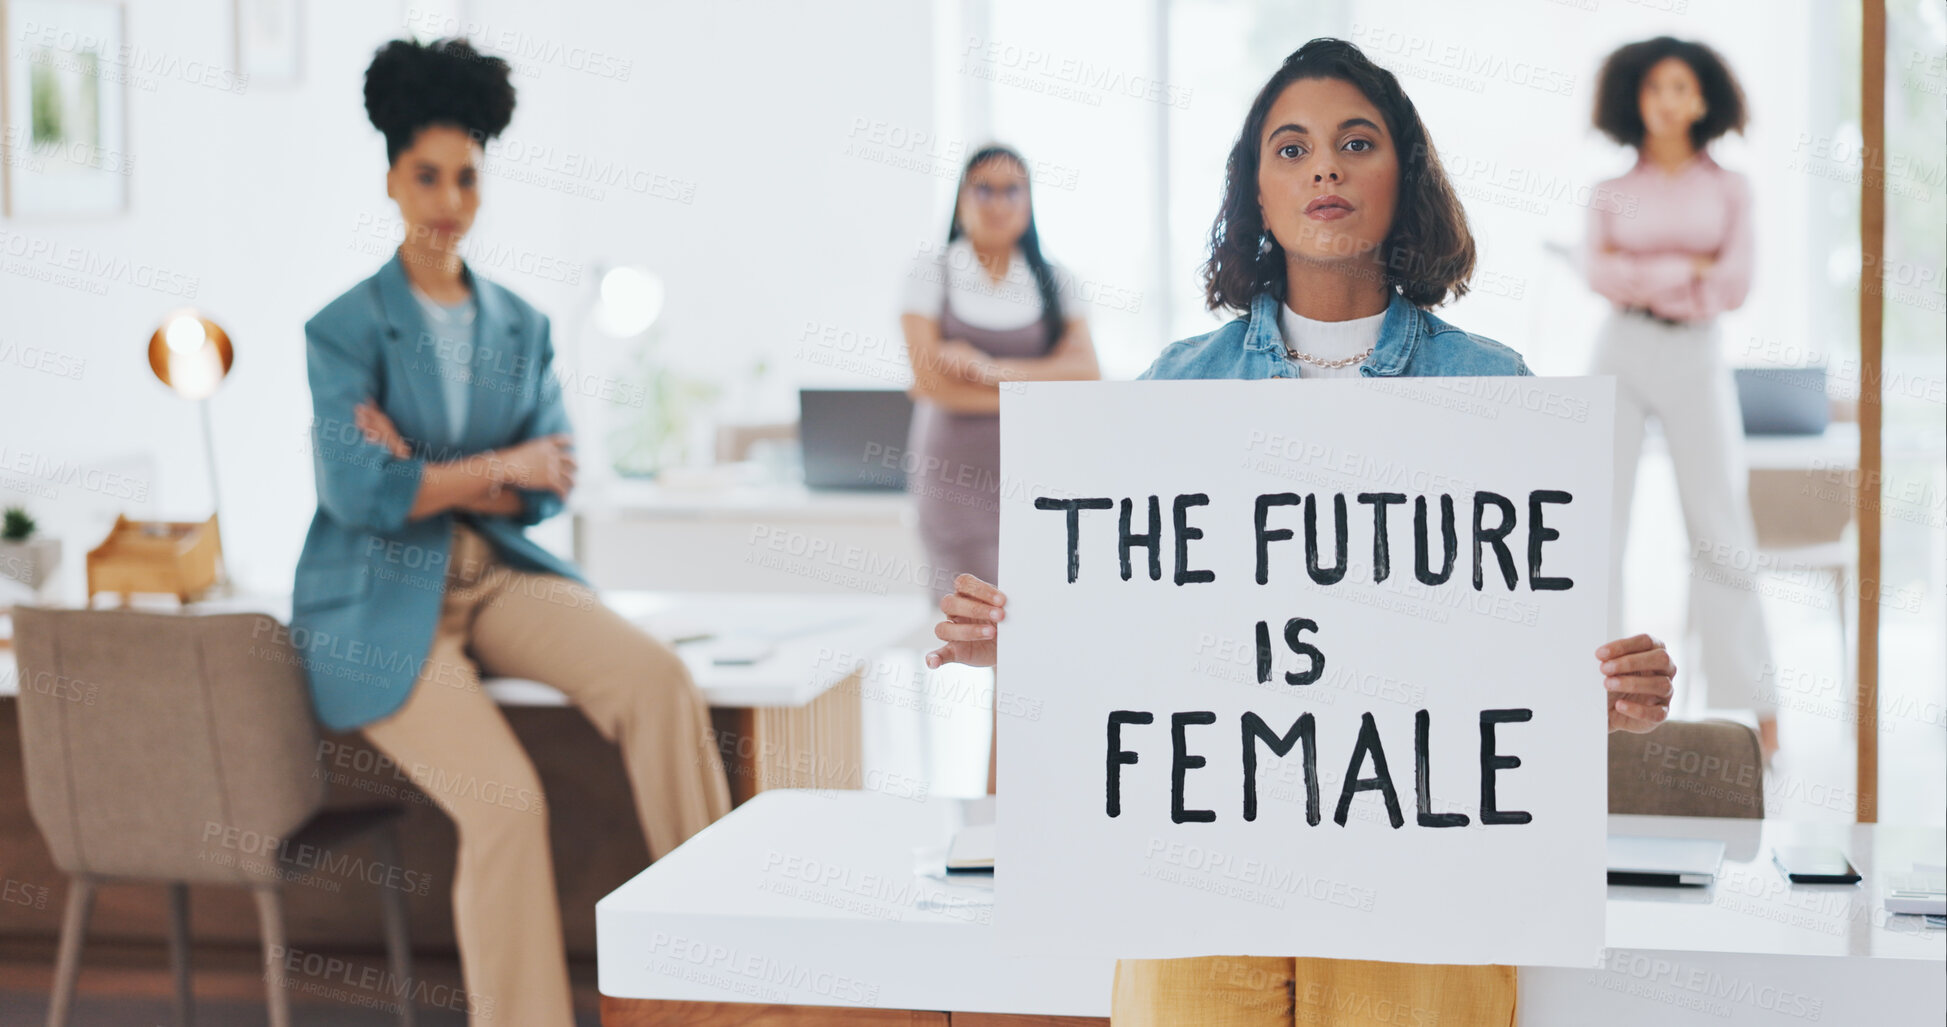 Buy stock photo Women with sign, portrait and future, gender equality in workplace with human rights, justice and change. Revolution, professional inclusion for equal pay with empowerment, feminism and protest